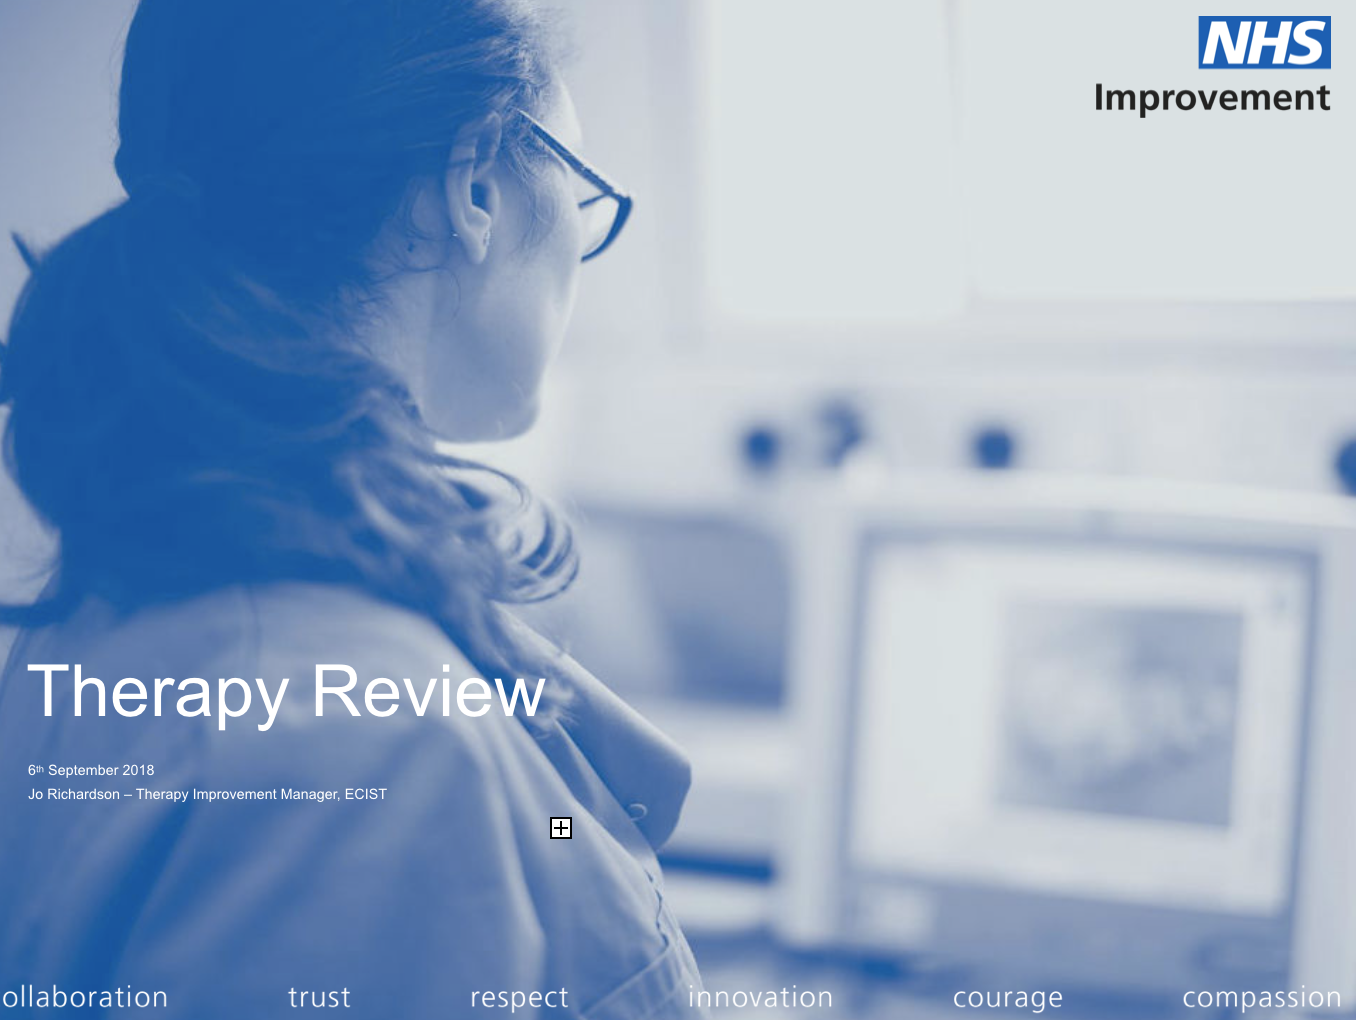 Therapy Review - ECIST and Dudley Group NHS Foundation Trust featured image